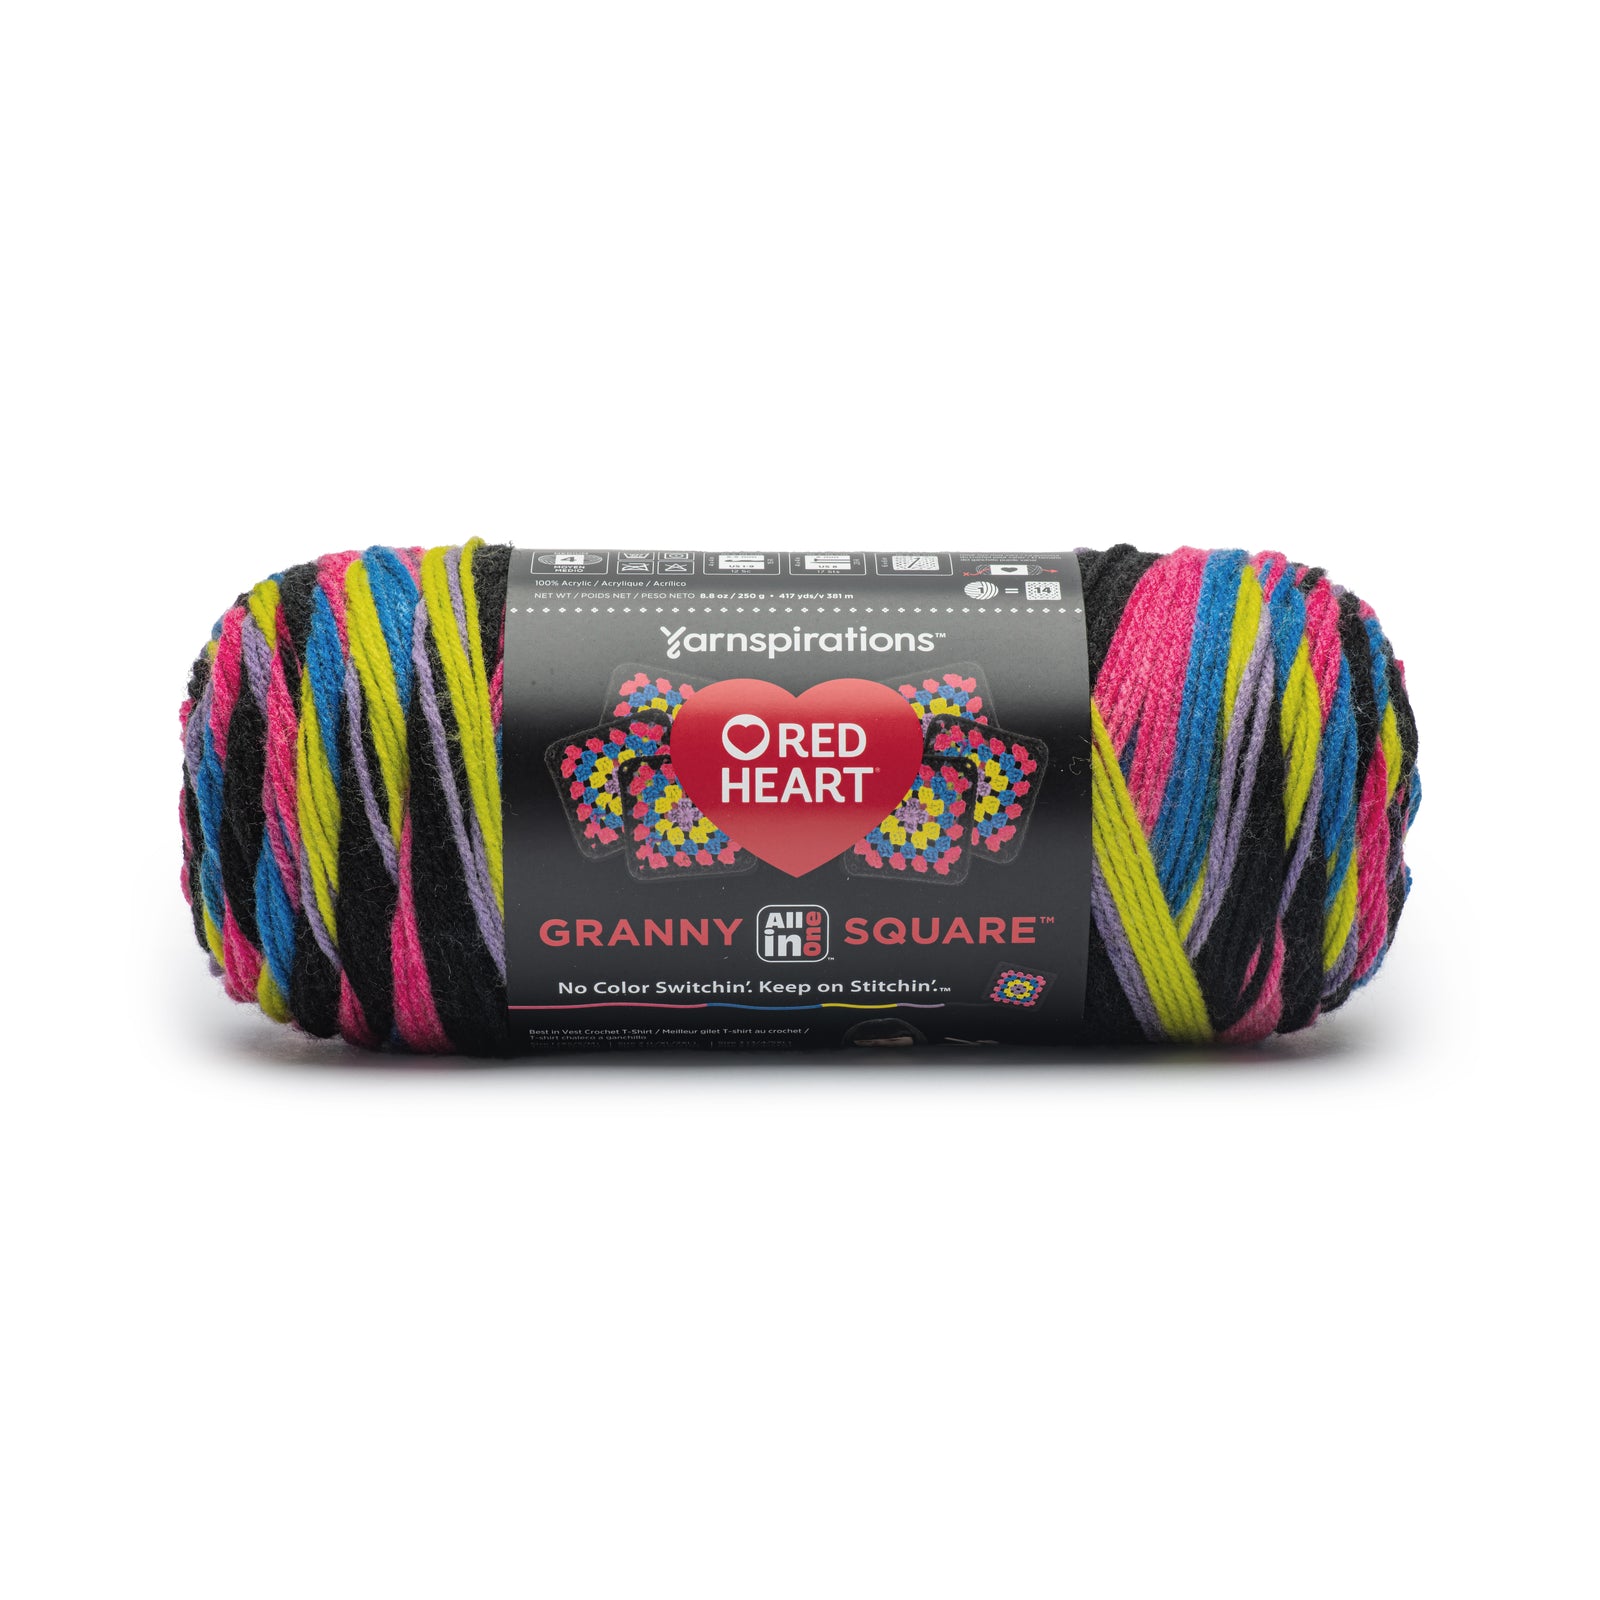 Red Heart All In One Granny Square Yarn (250g/8.8oz) Black - Neon Lights